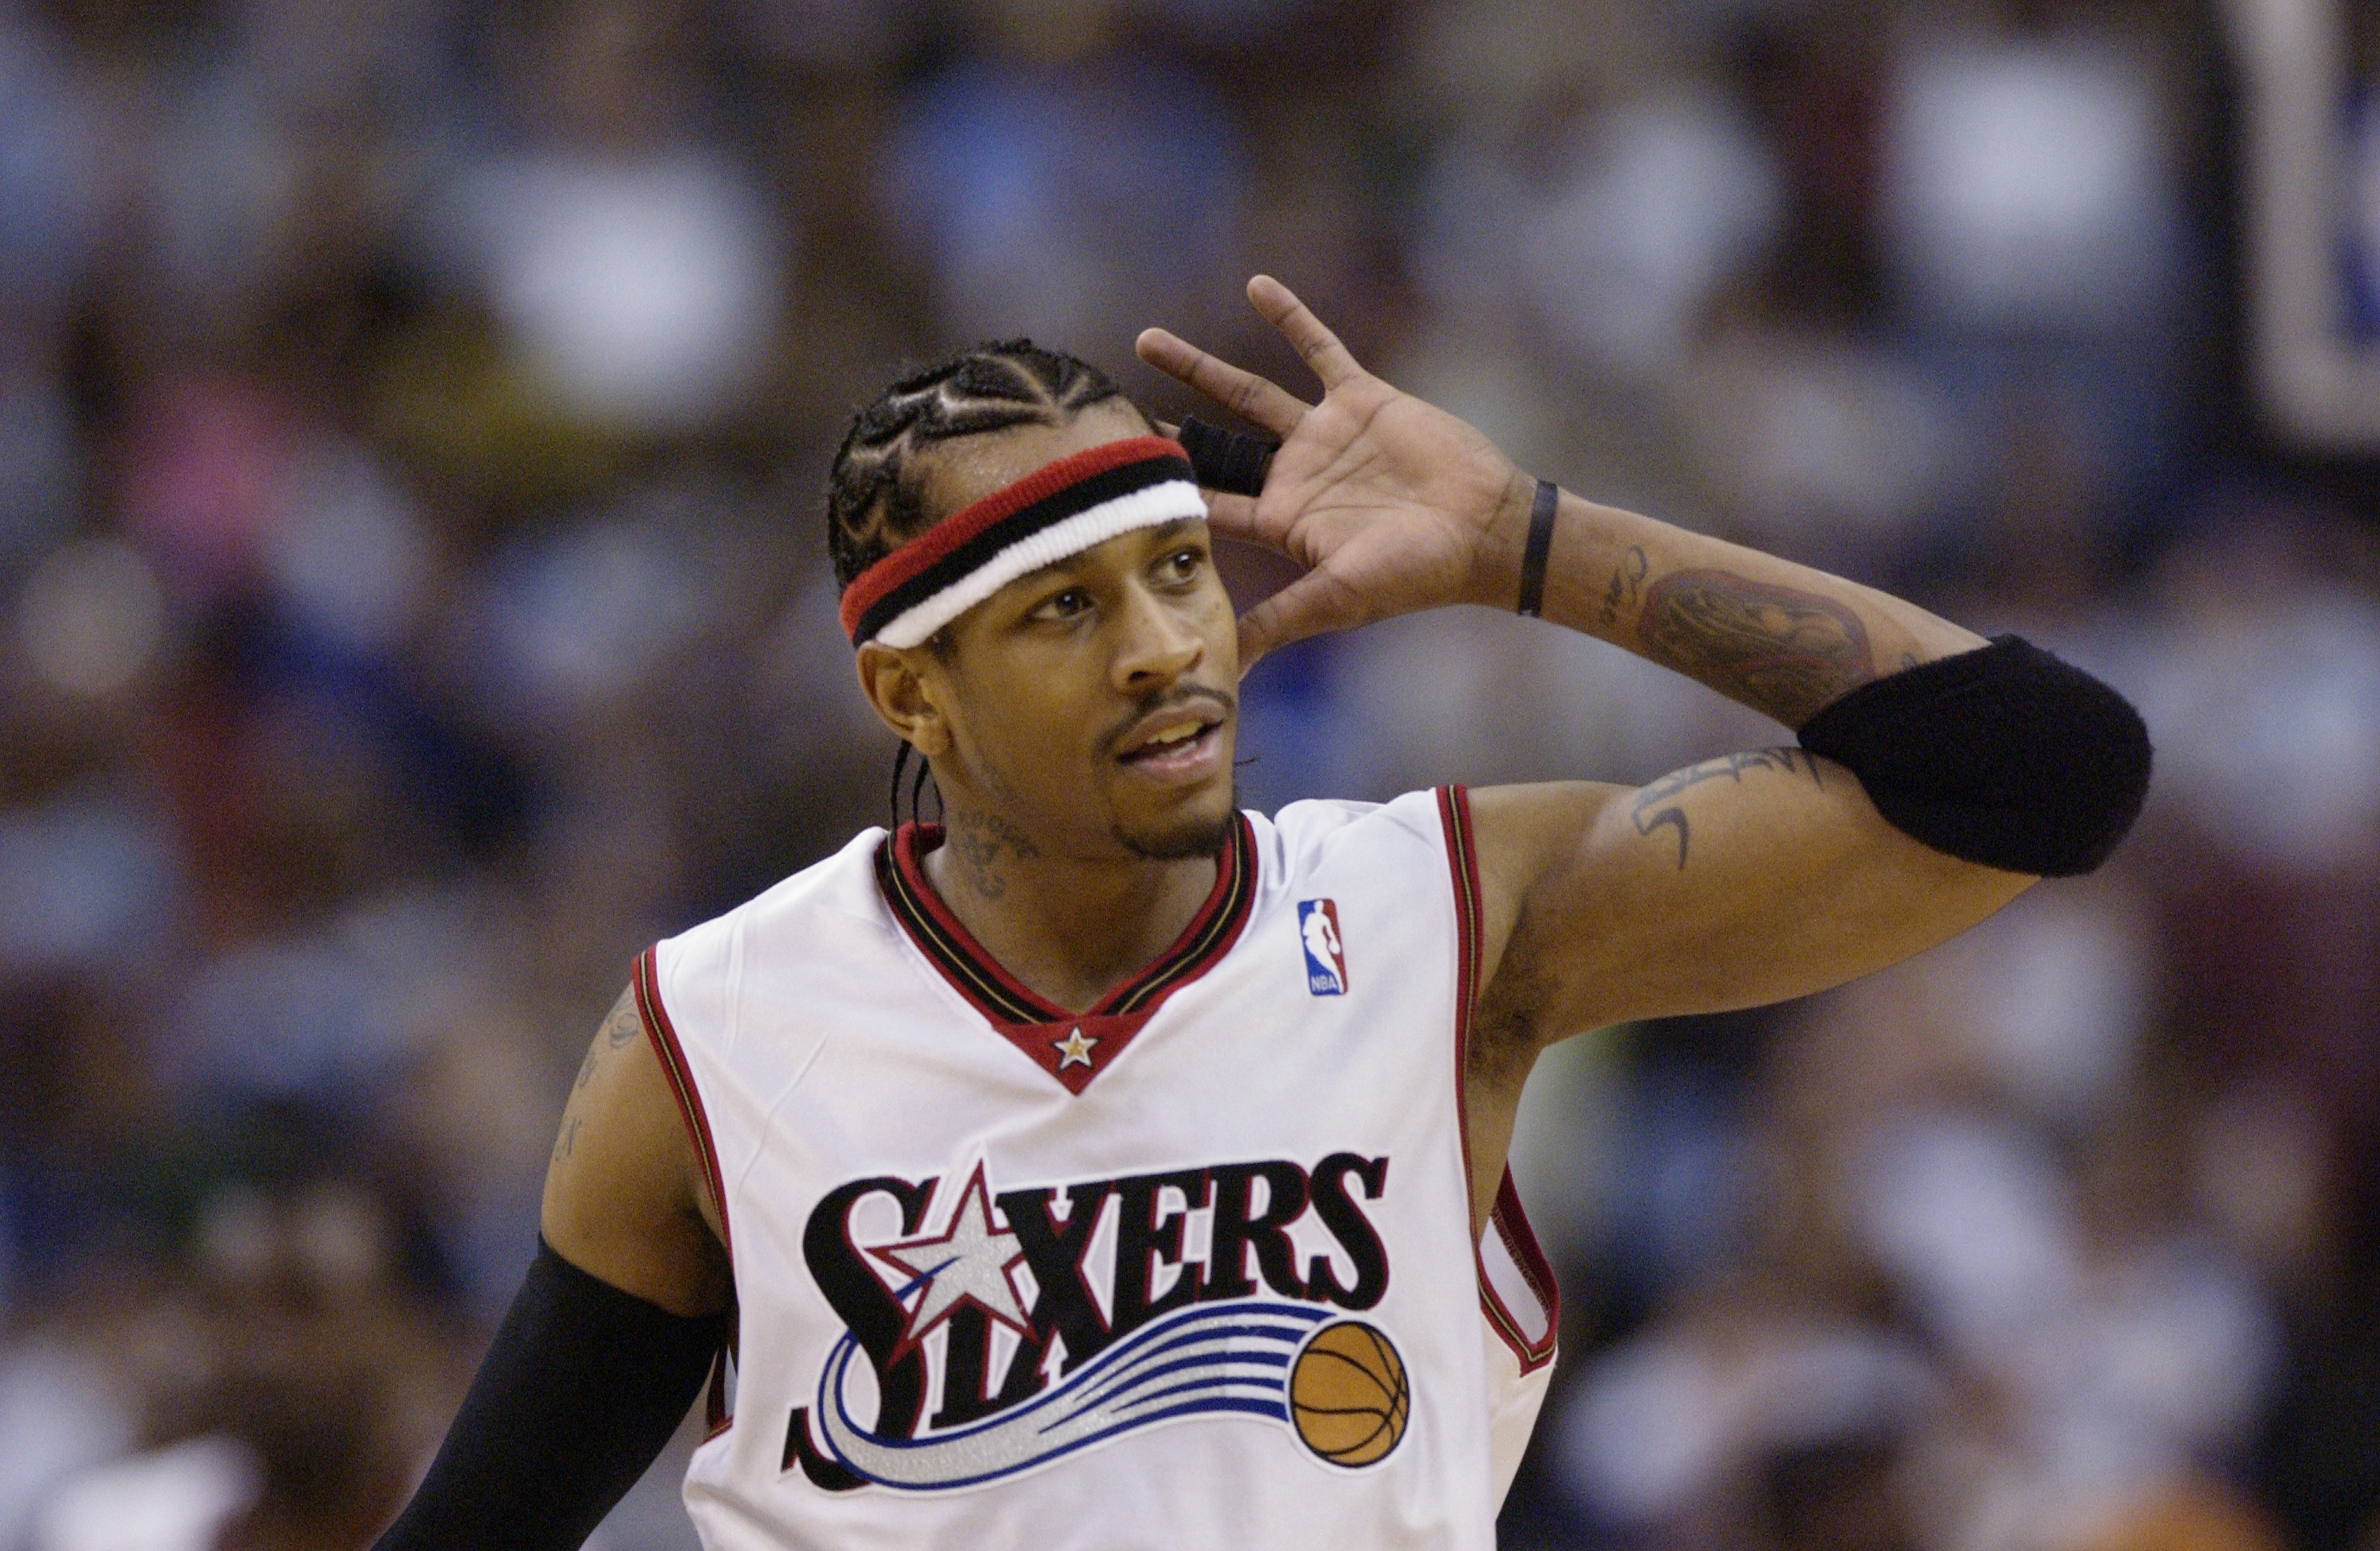 How Allen Iverson's Signature Style Created the Reebok Answer IV Retro